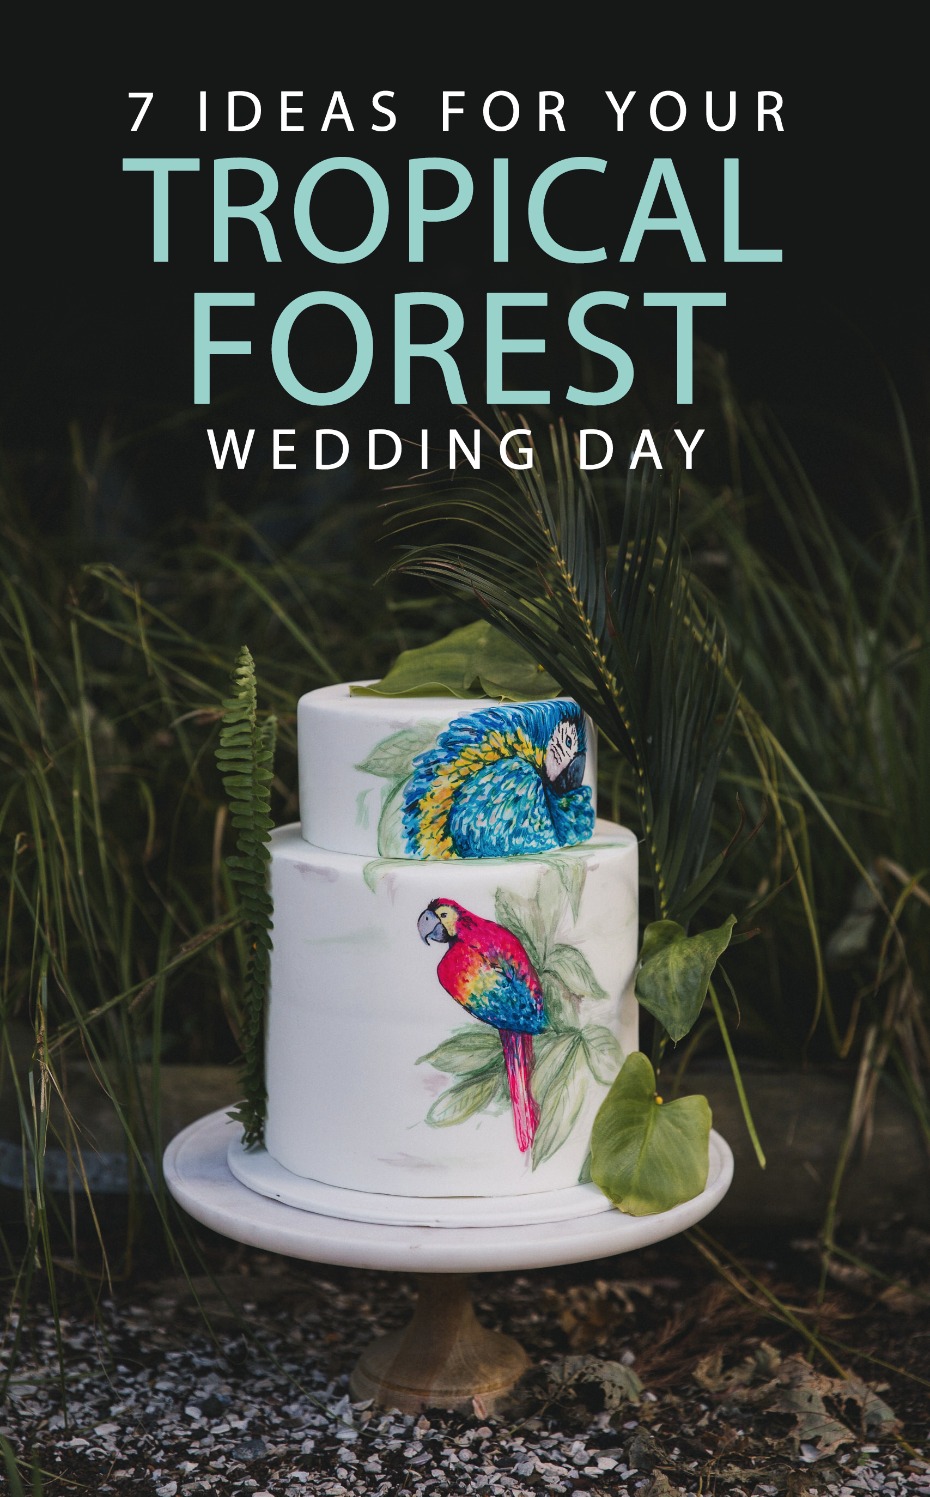 7 ideas for your tropical forest wedding